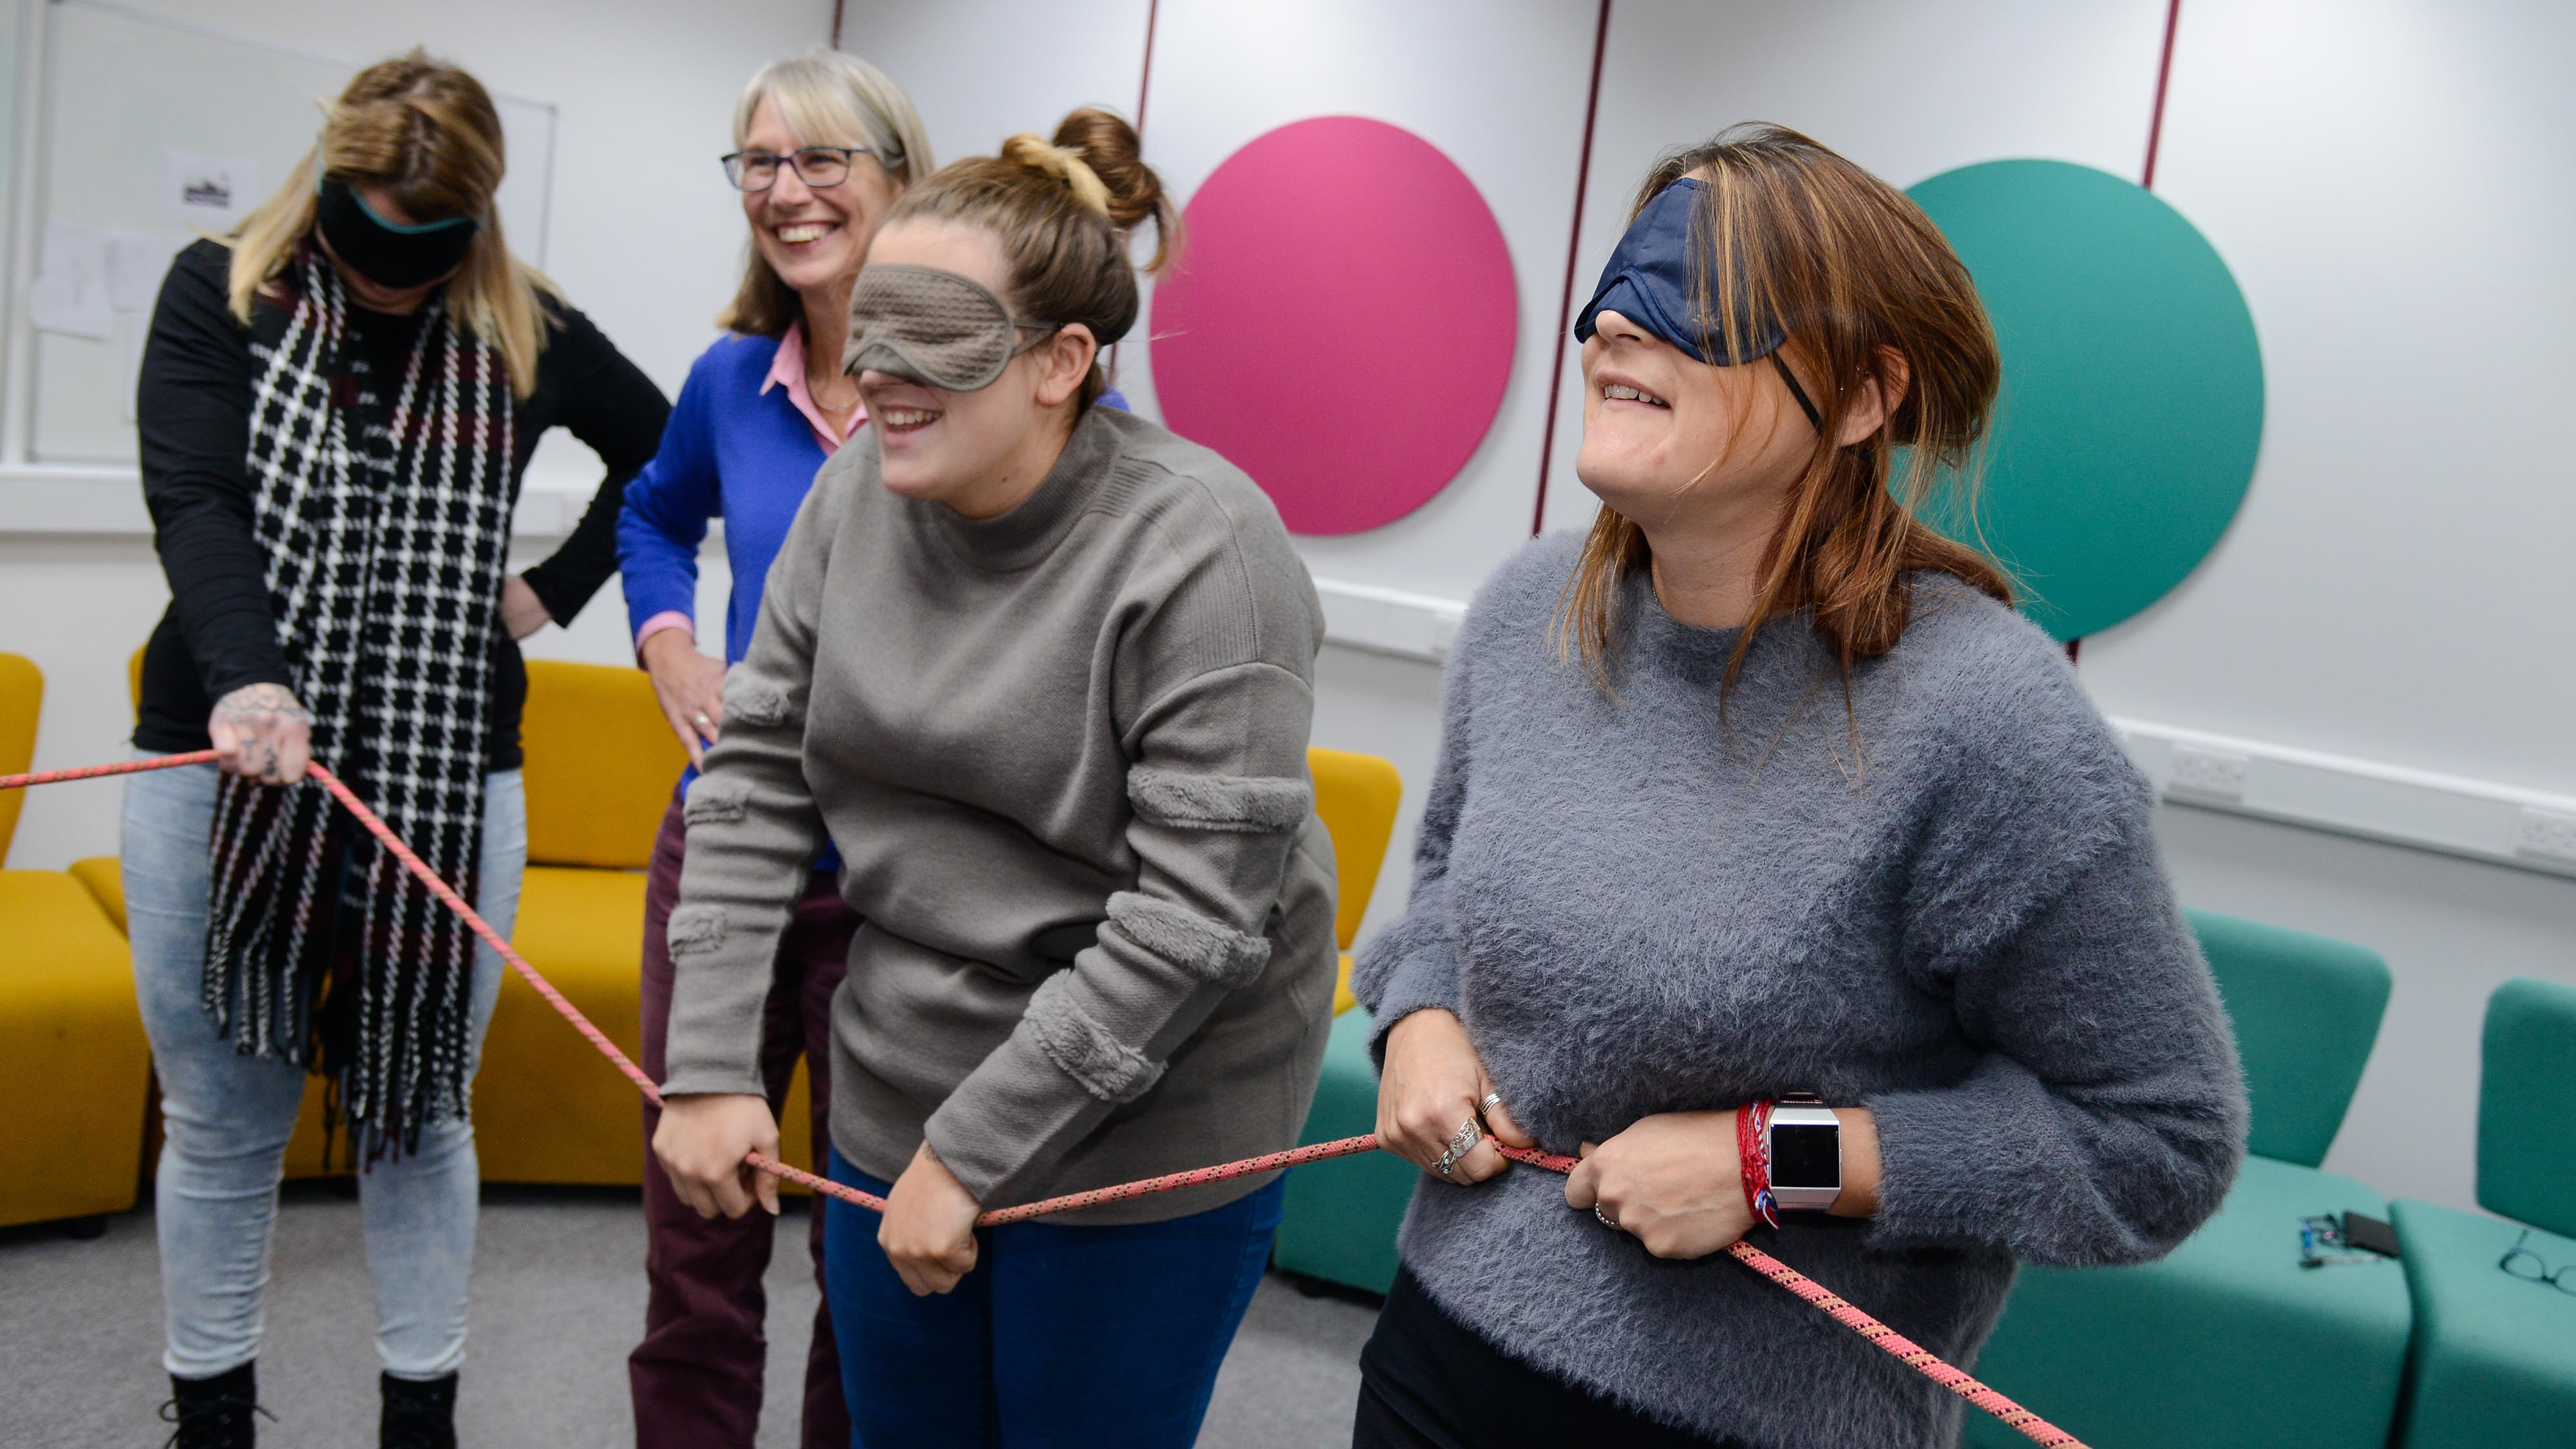 Students in blindfolds do a trust exercise